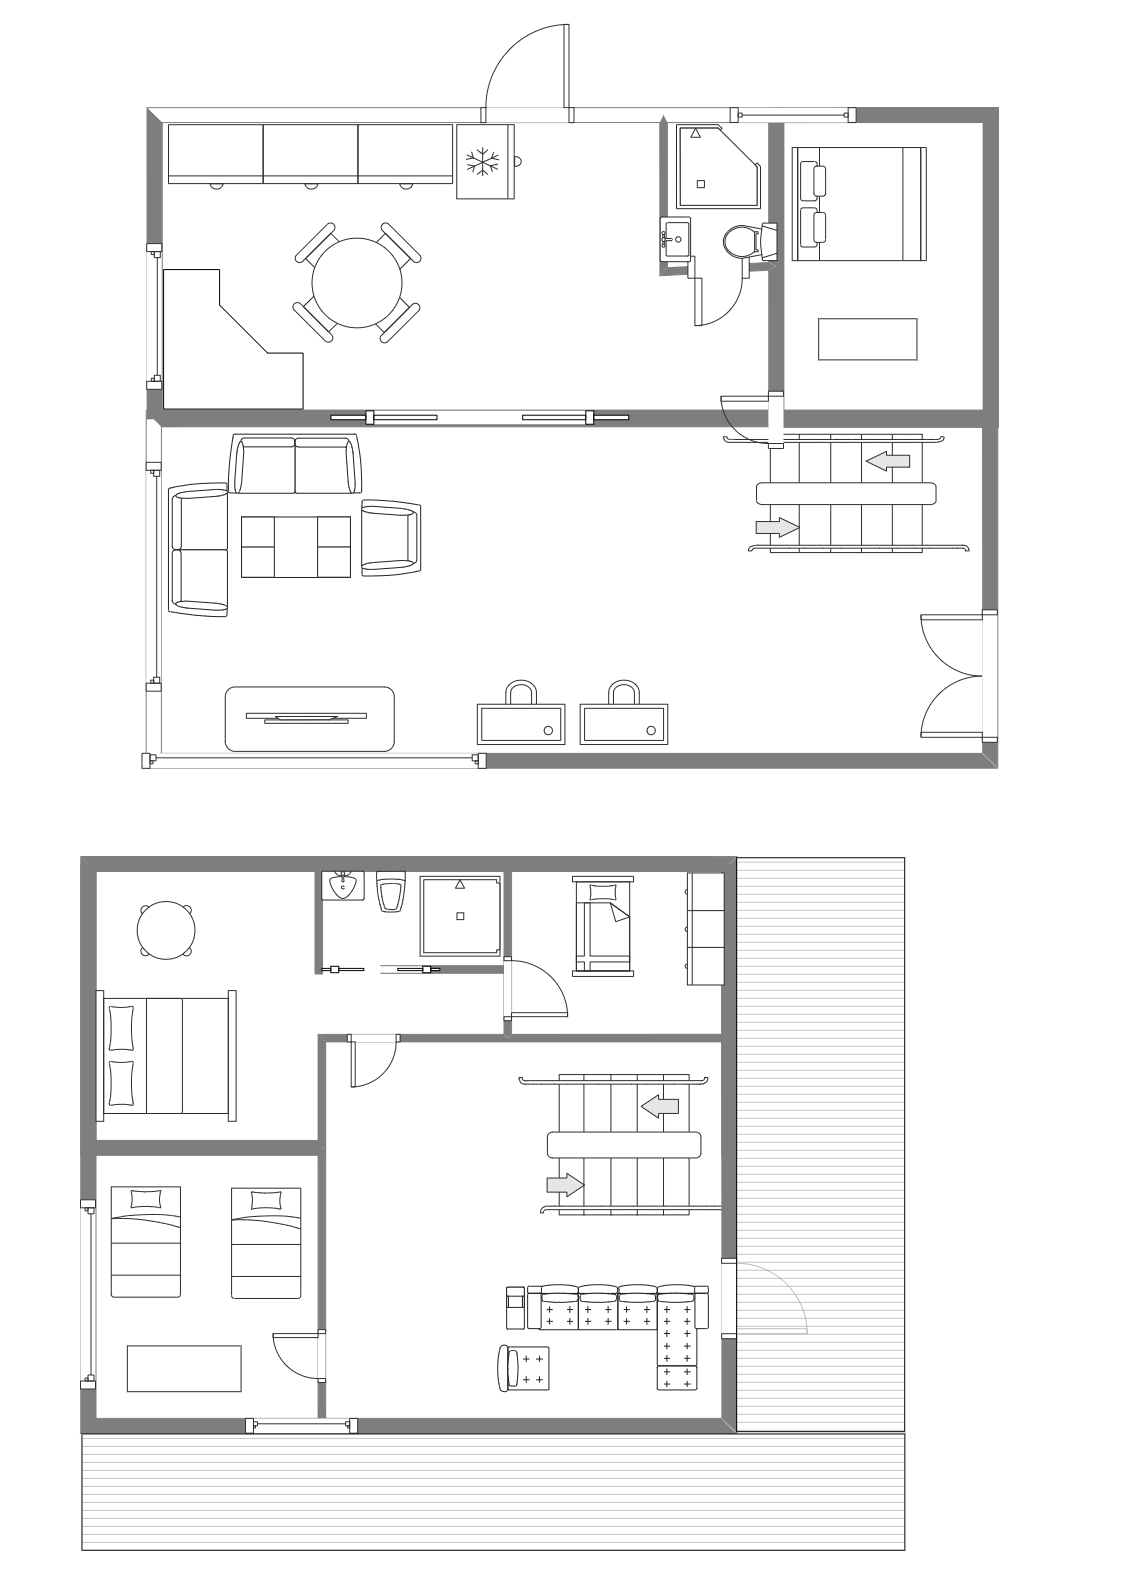 House with 4 Rooms Floor Plan